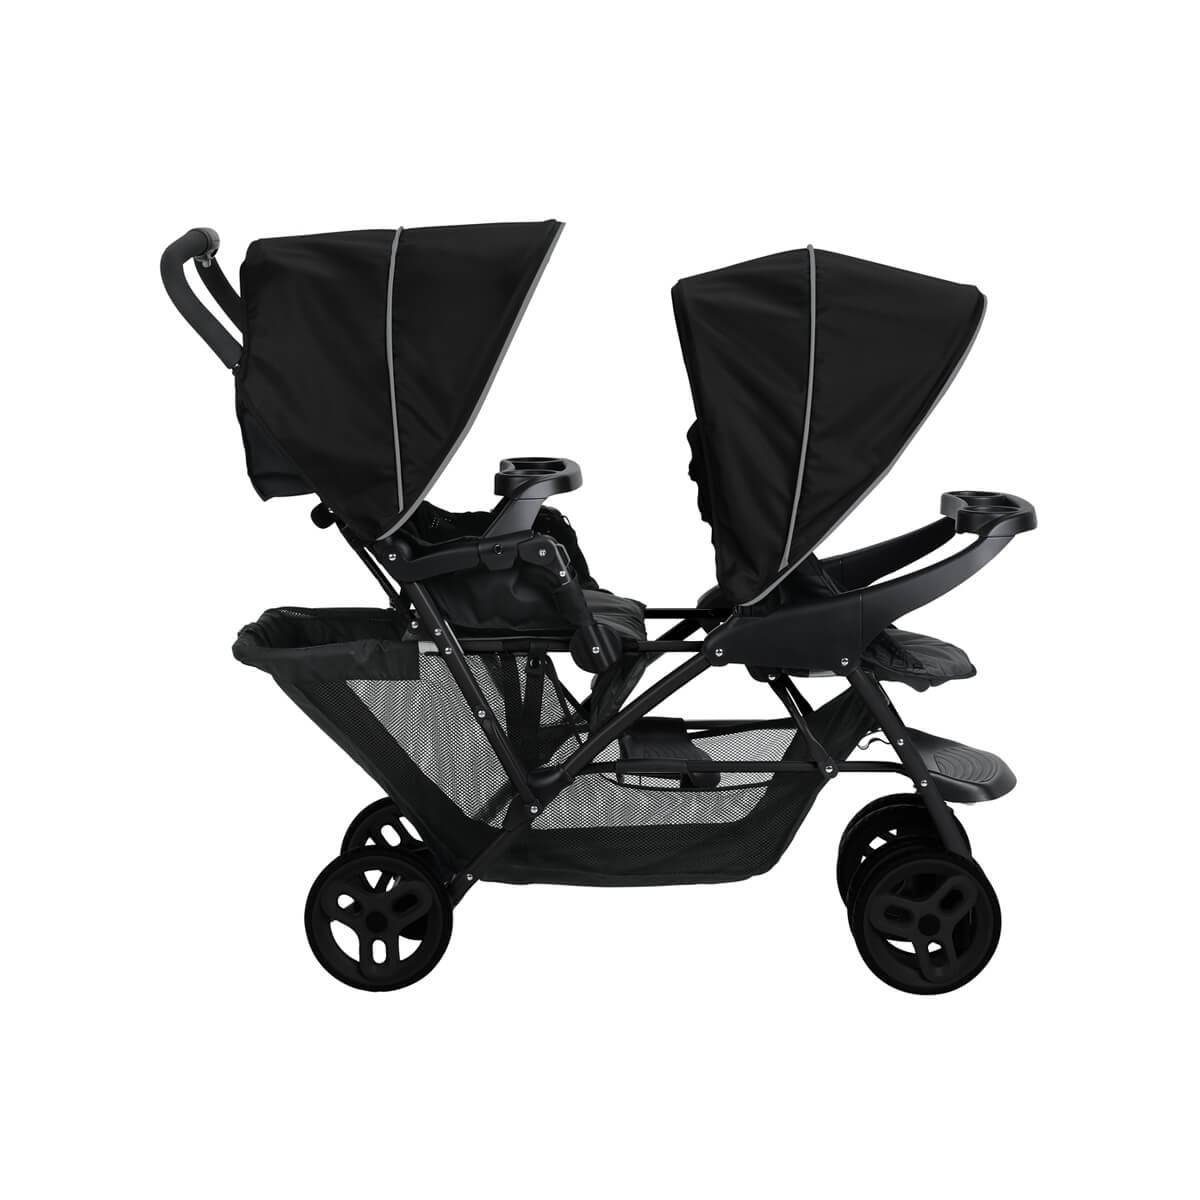 GRACO STADIUM DUO TANDEM STROLLER - BLACK/GREY -  | For Your Little One